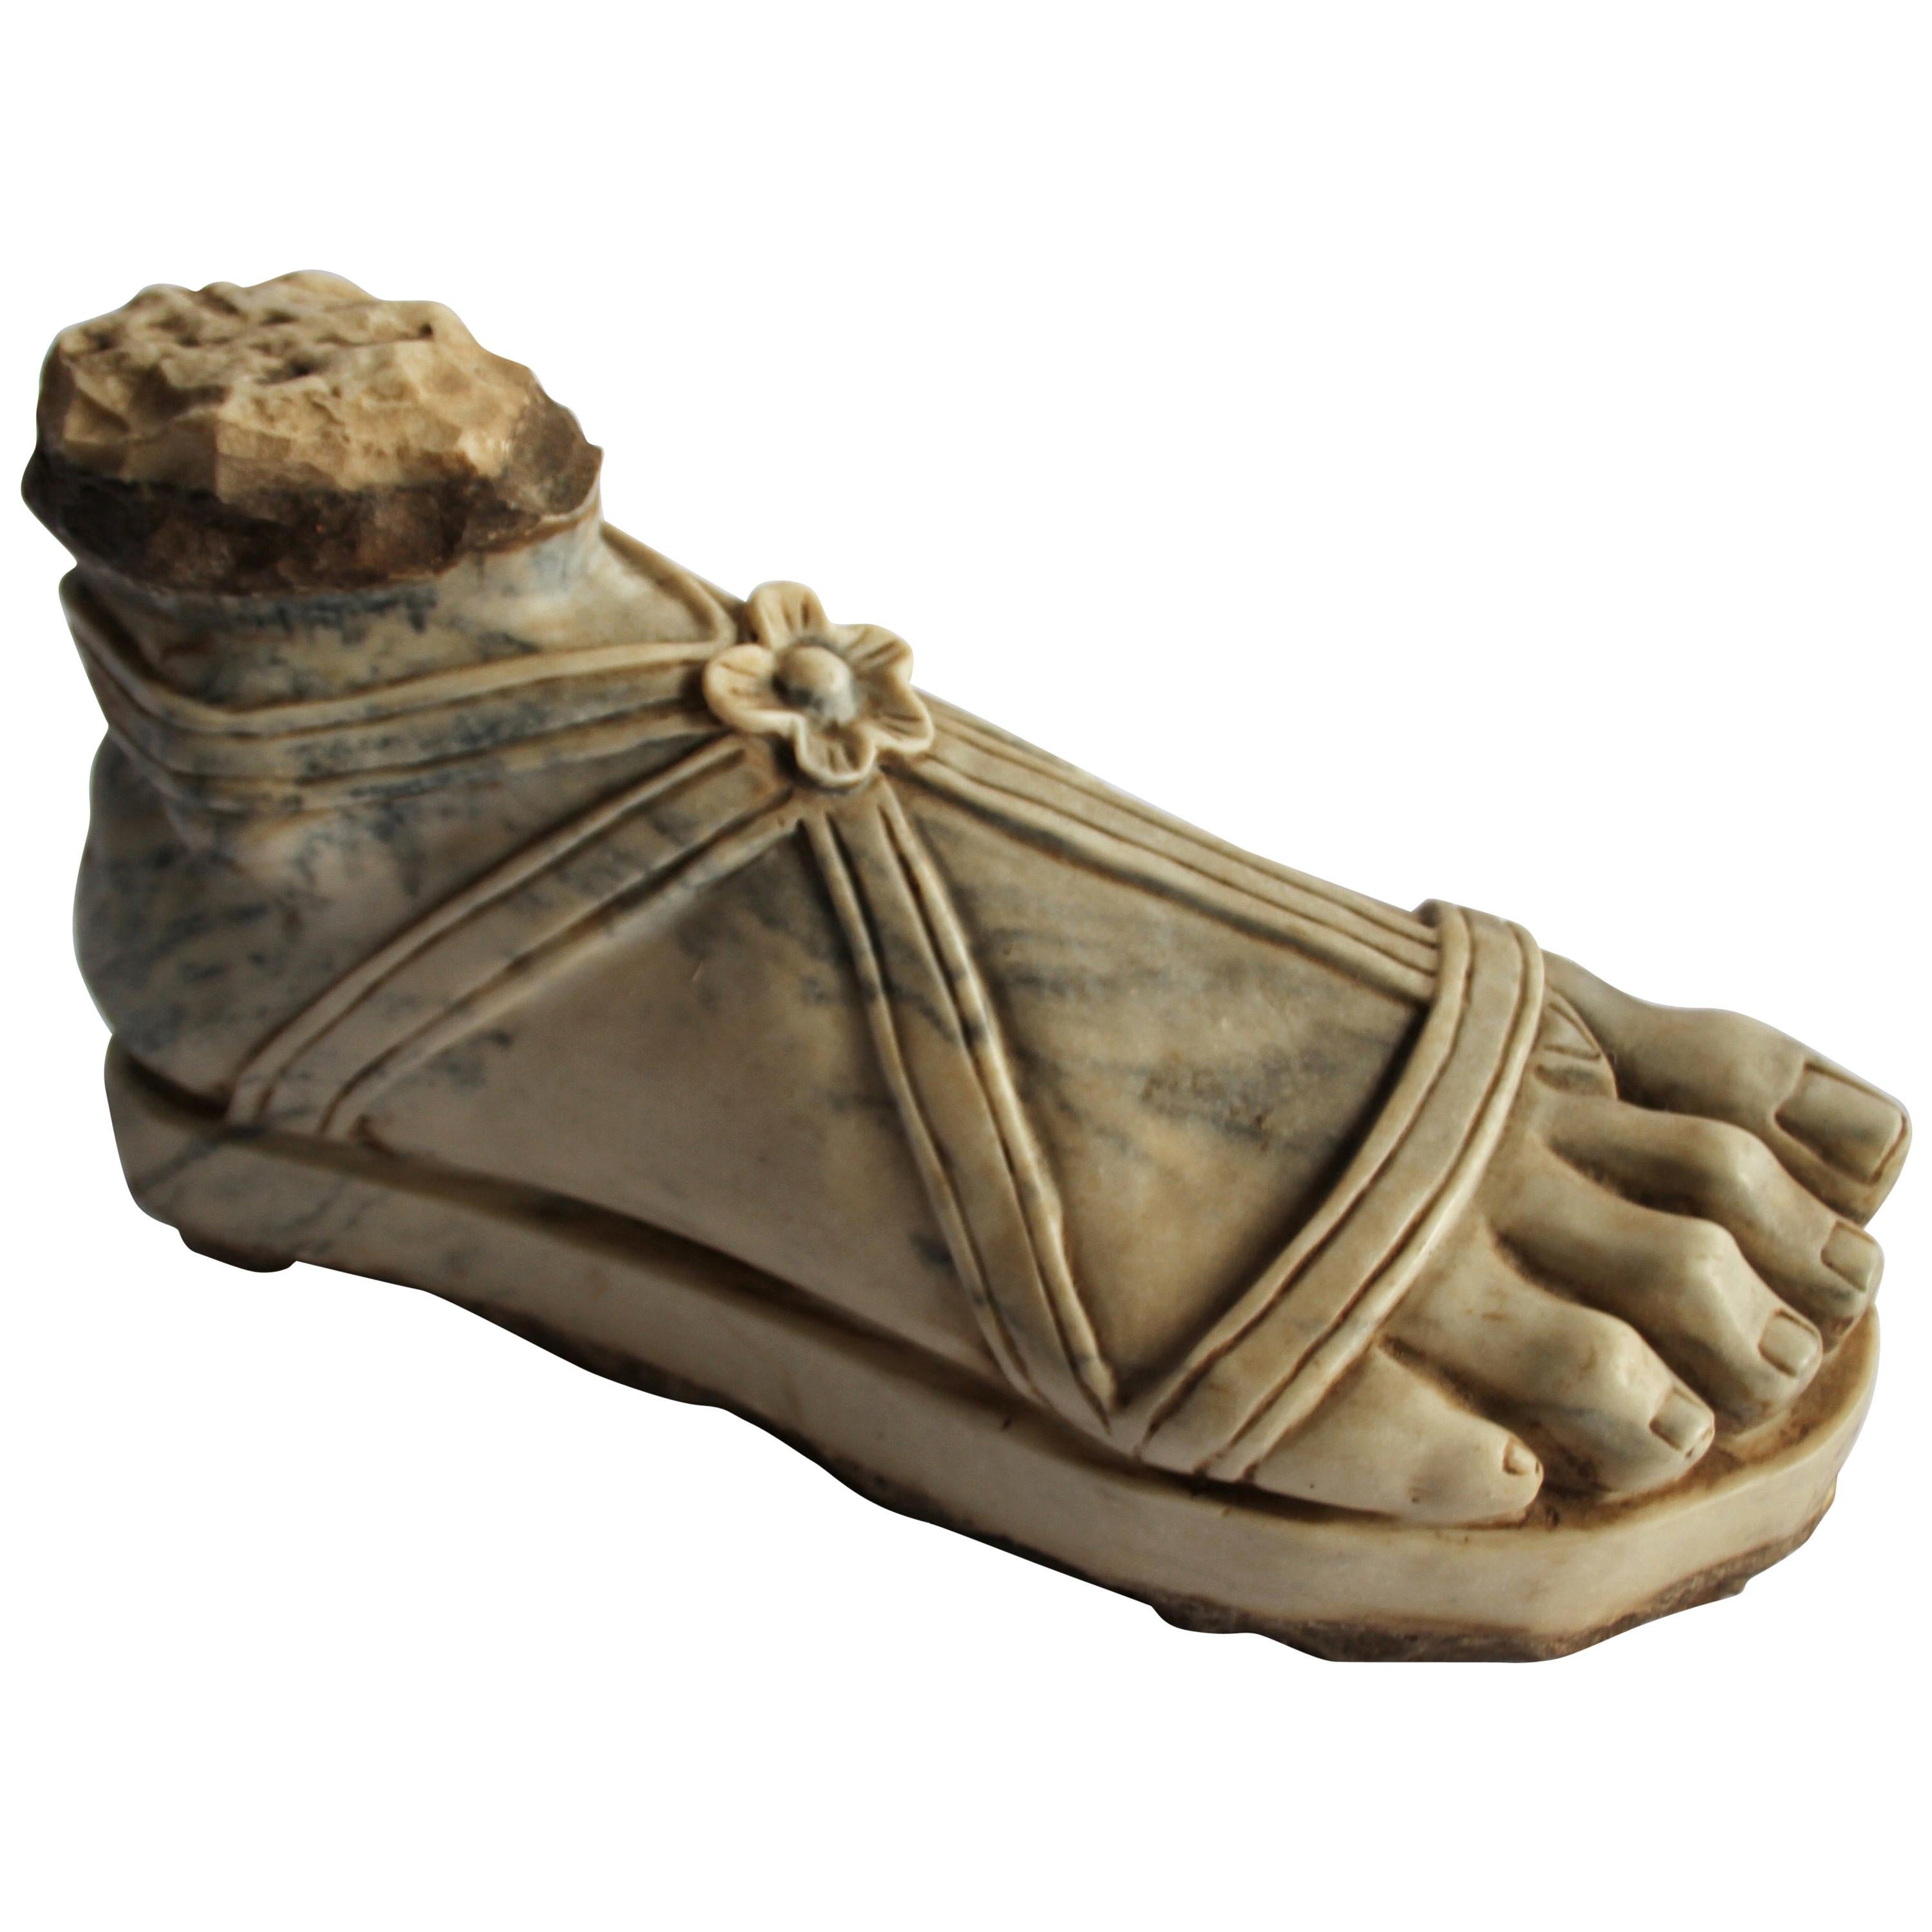 Carrera Italian Marble Sculptured Foot, Hand Carved, 20th Century For Sale